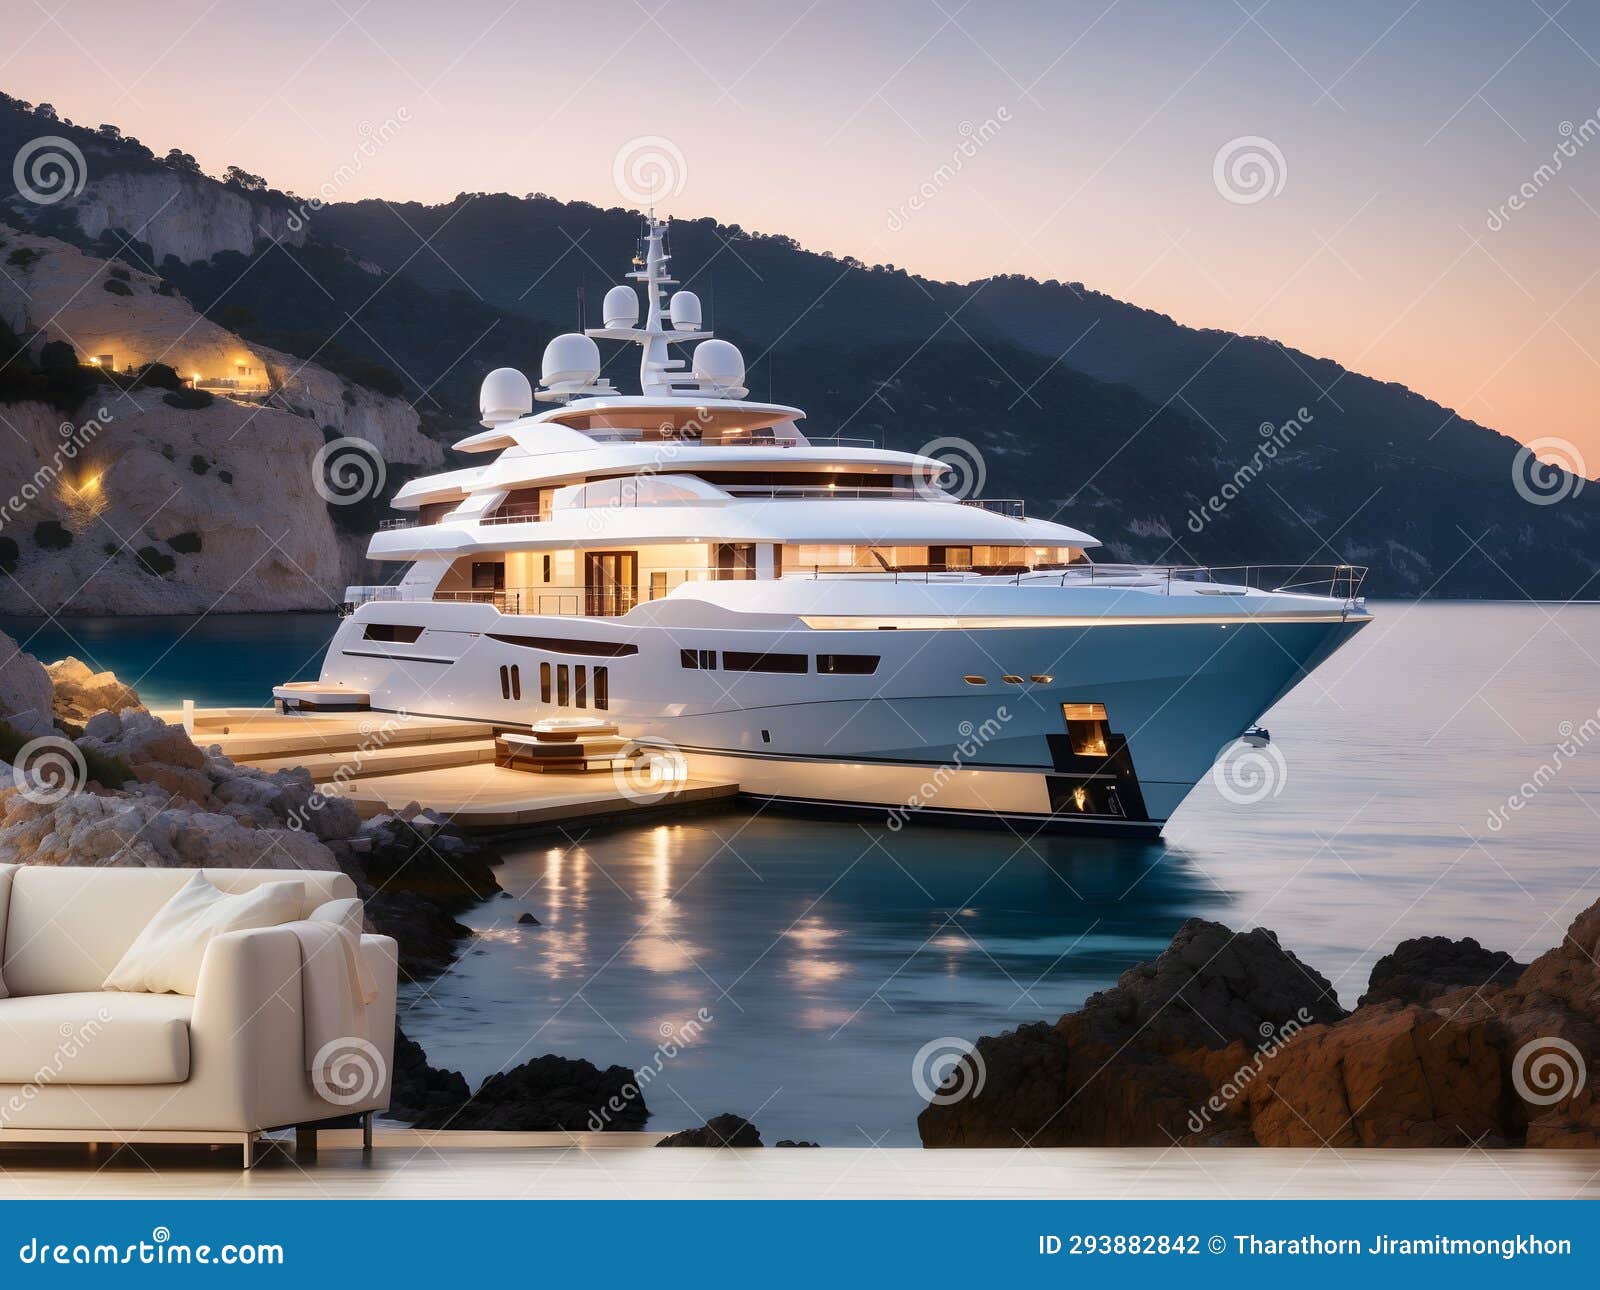 twilight tranquility: modern megayacht aglow in a scenic harbor